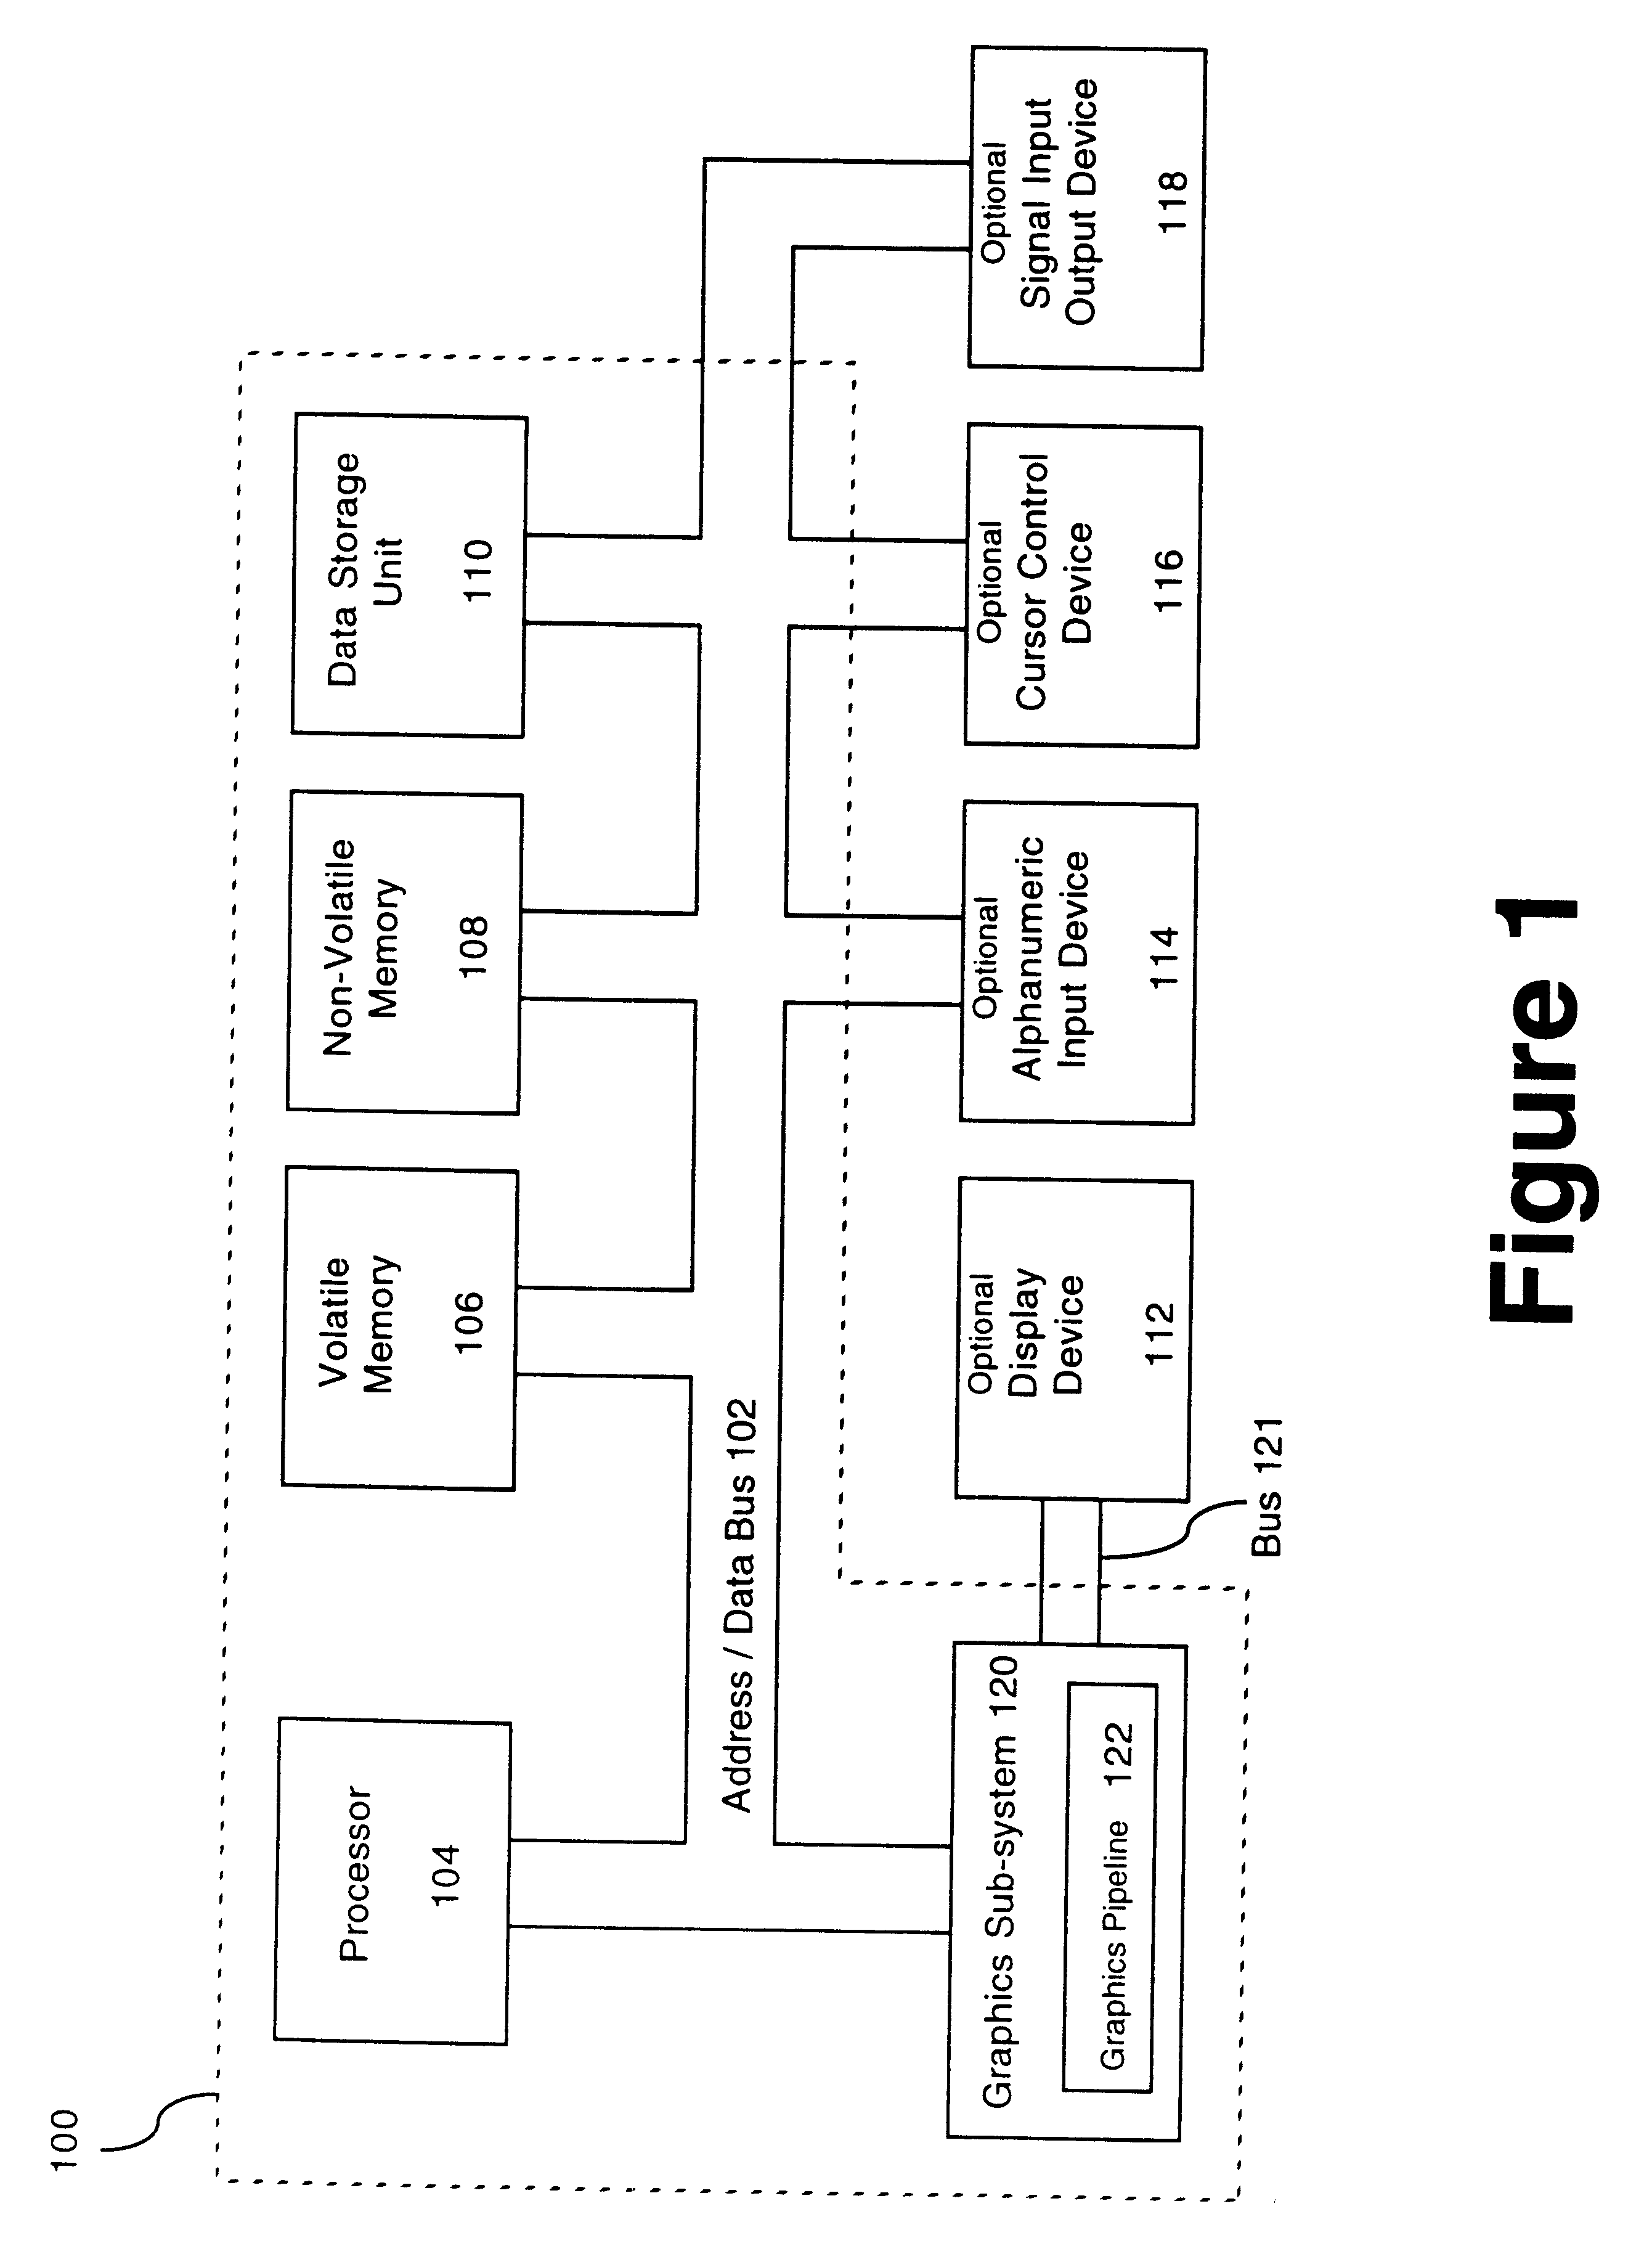 Method and system for evaluating derivatives in screen space using perspective corrected barycentric coordinates